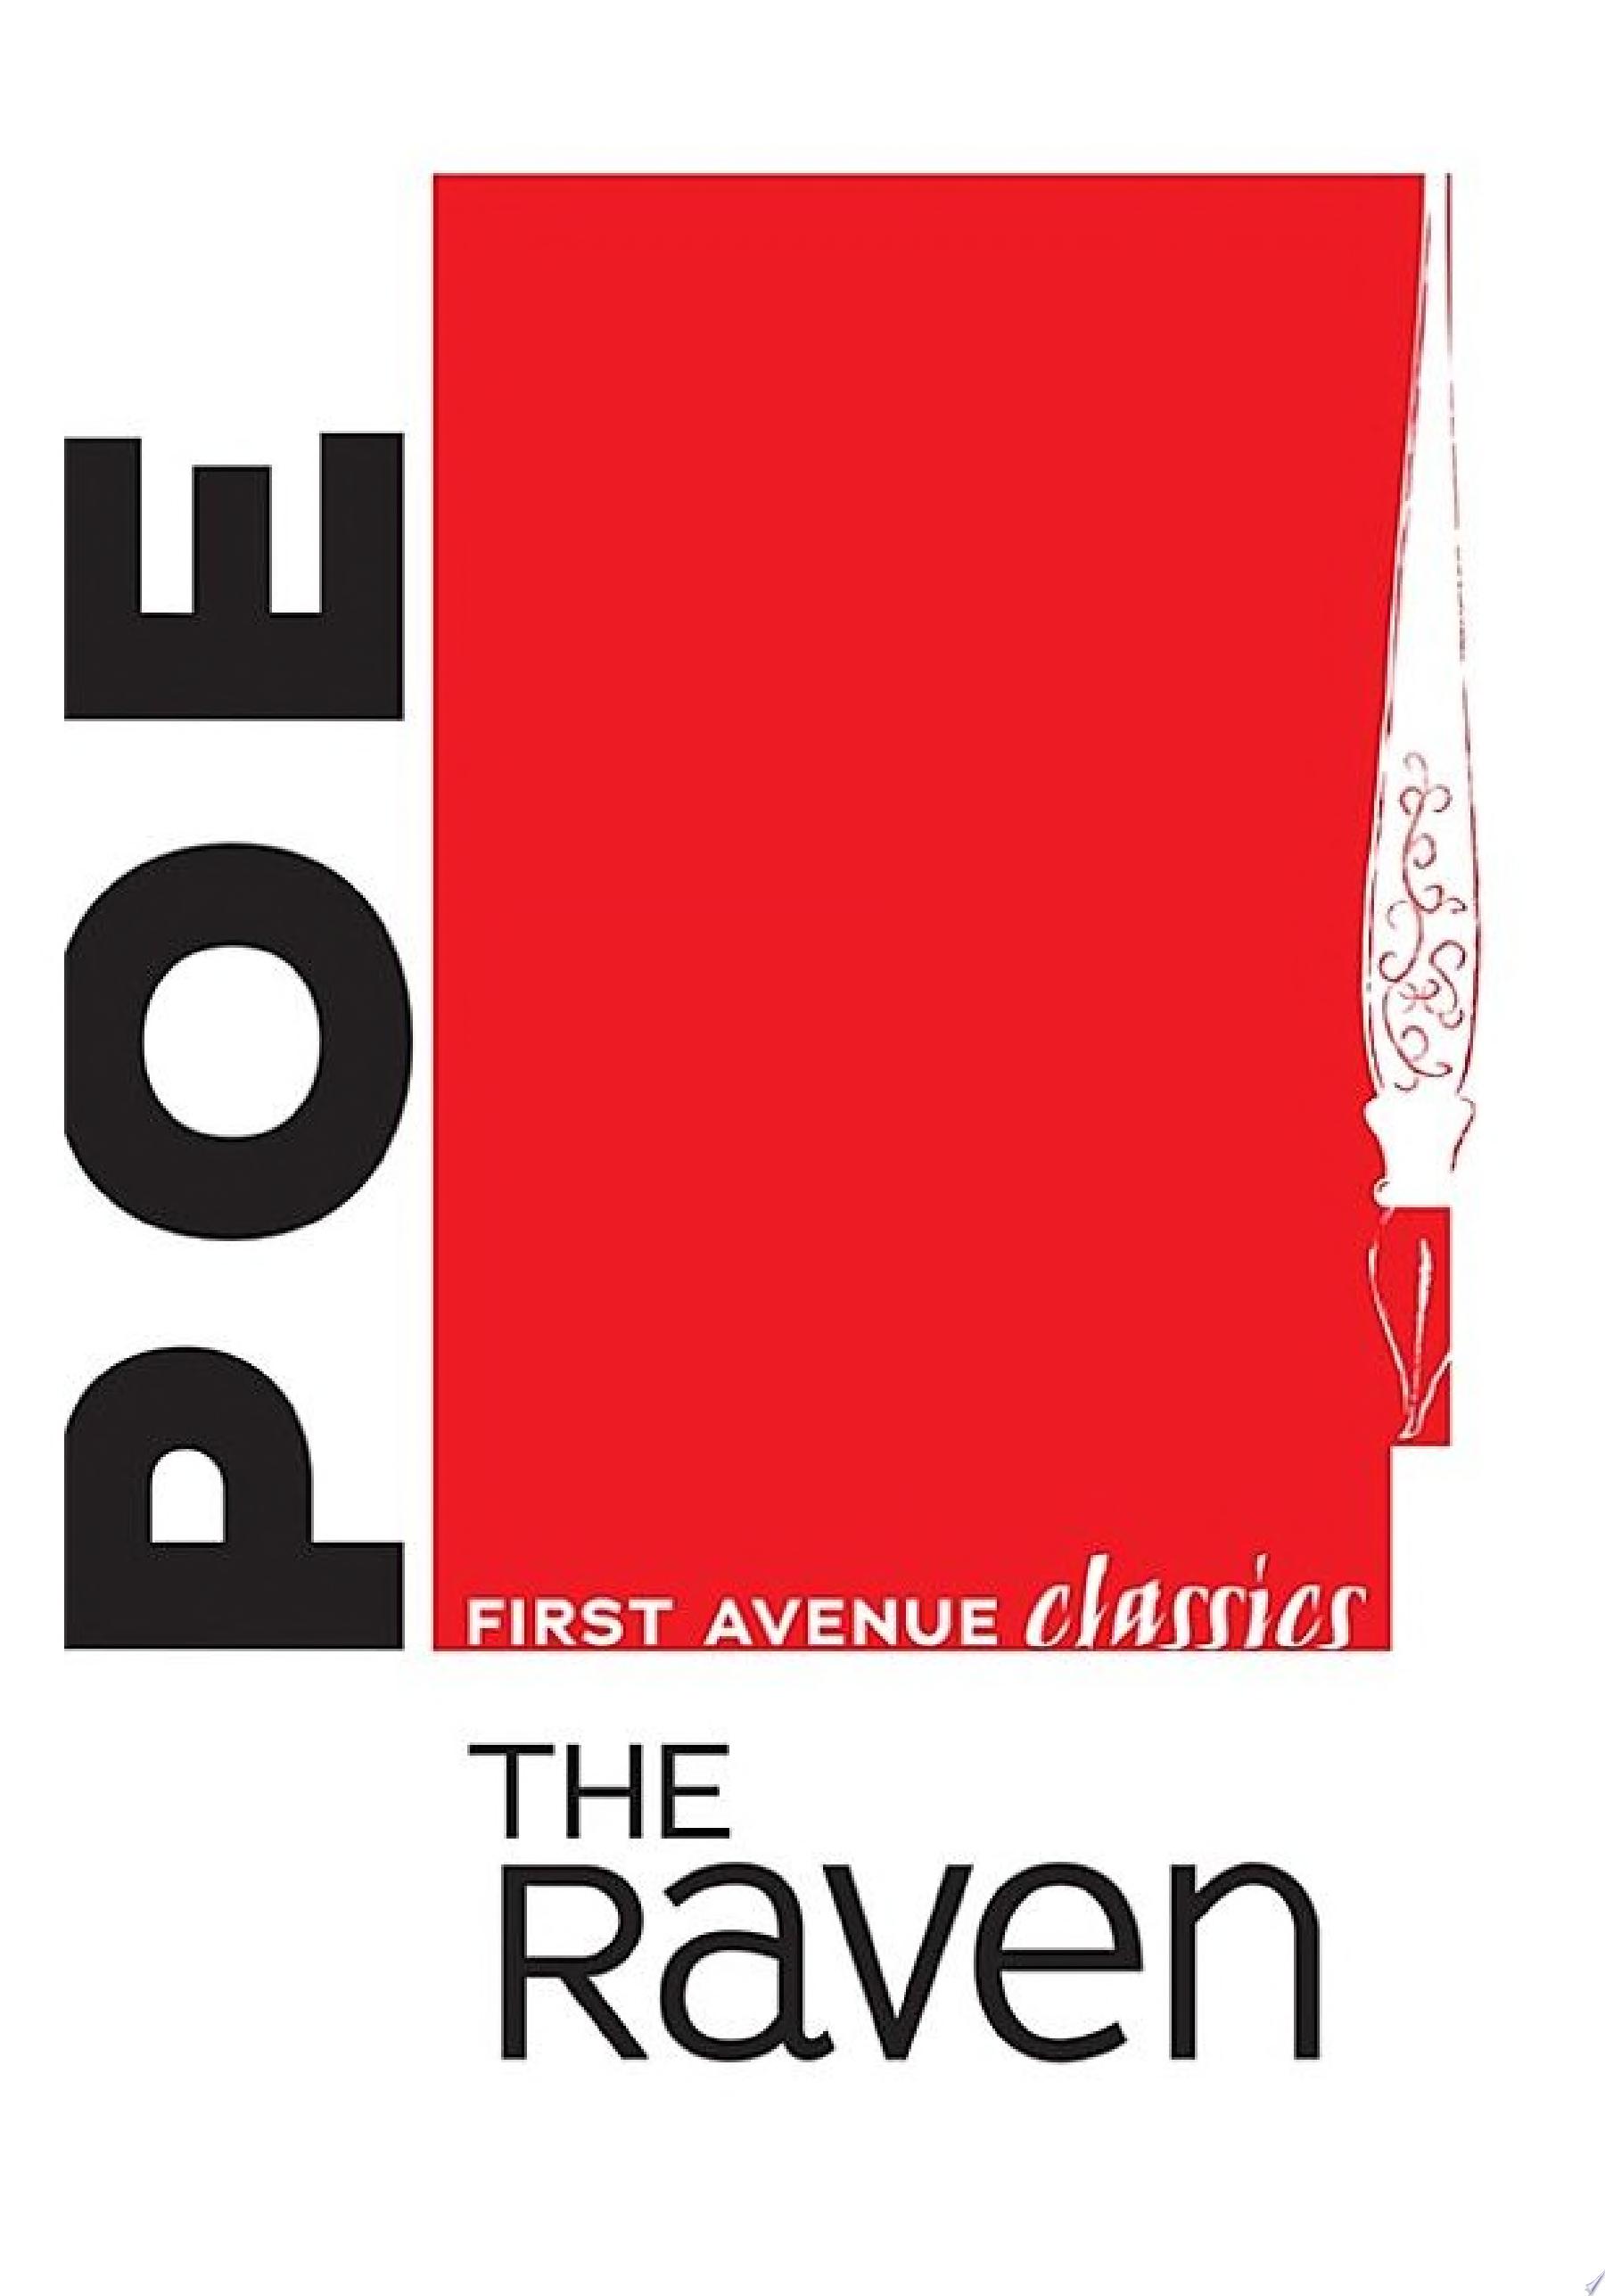 Image for "The Raven"